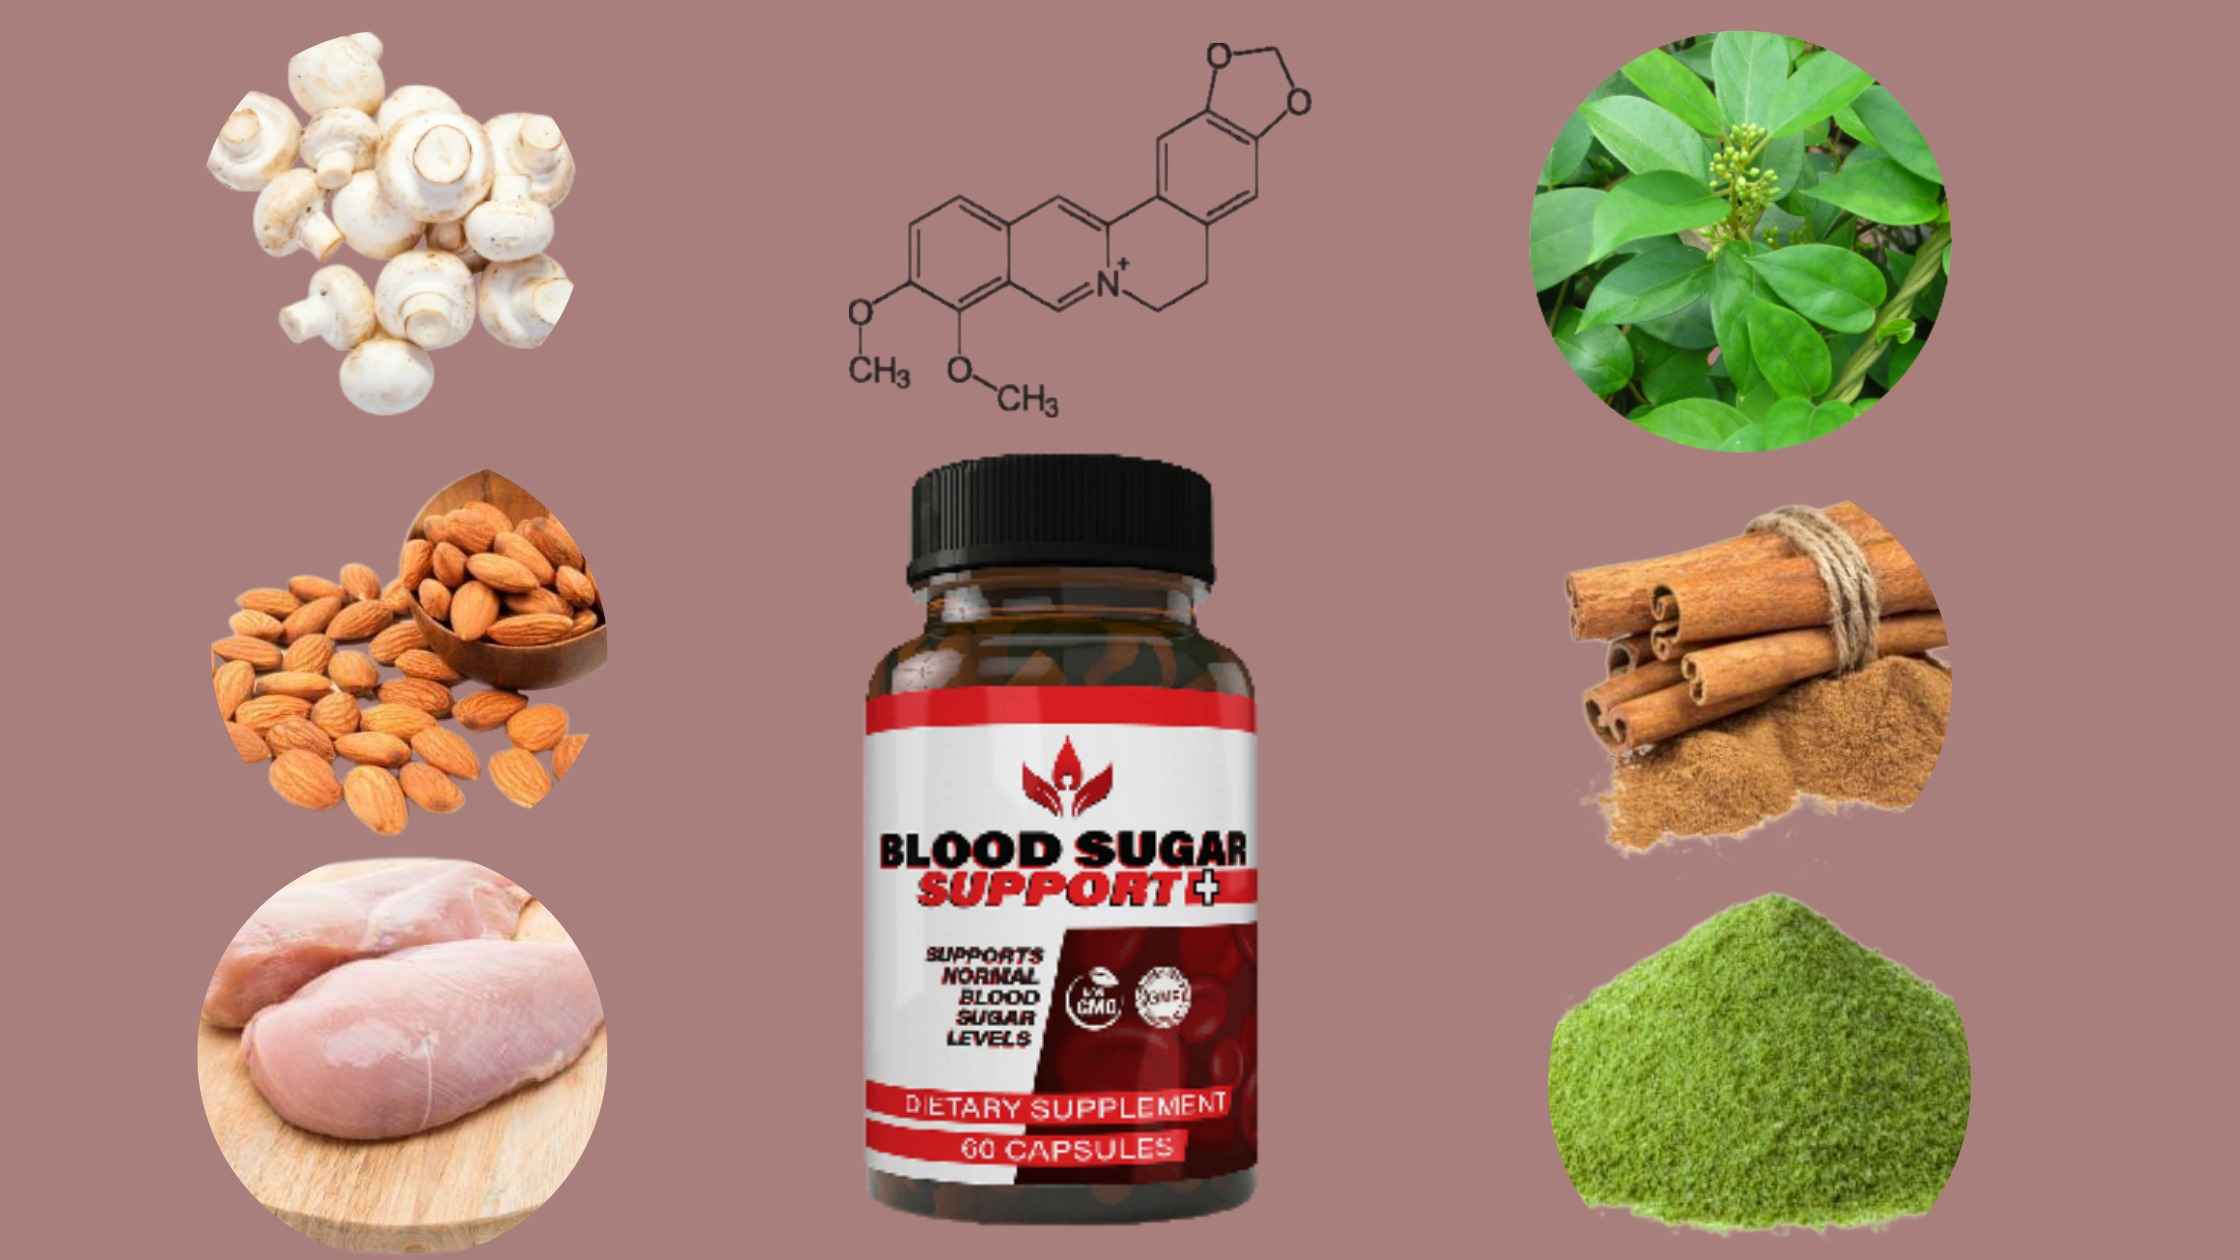 Blood Sugar Support Plus Supplement Facts